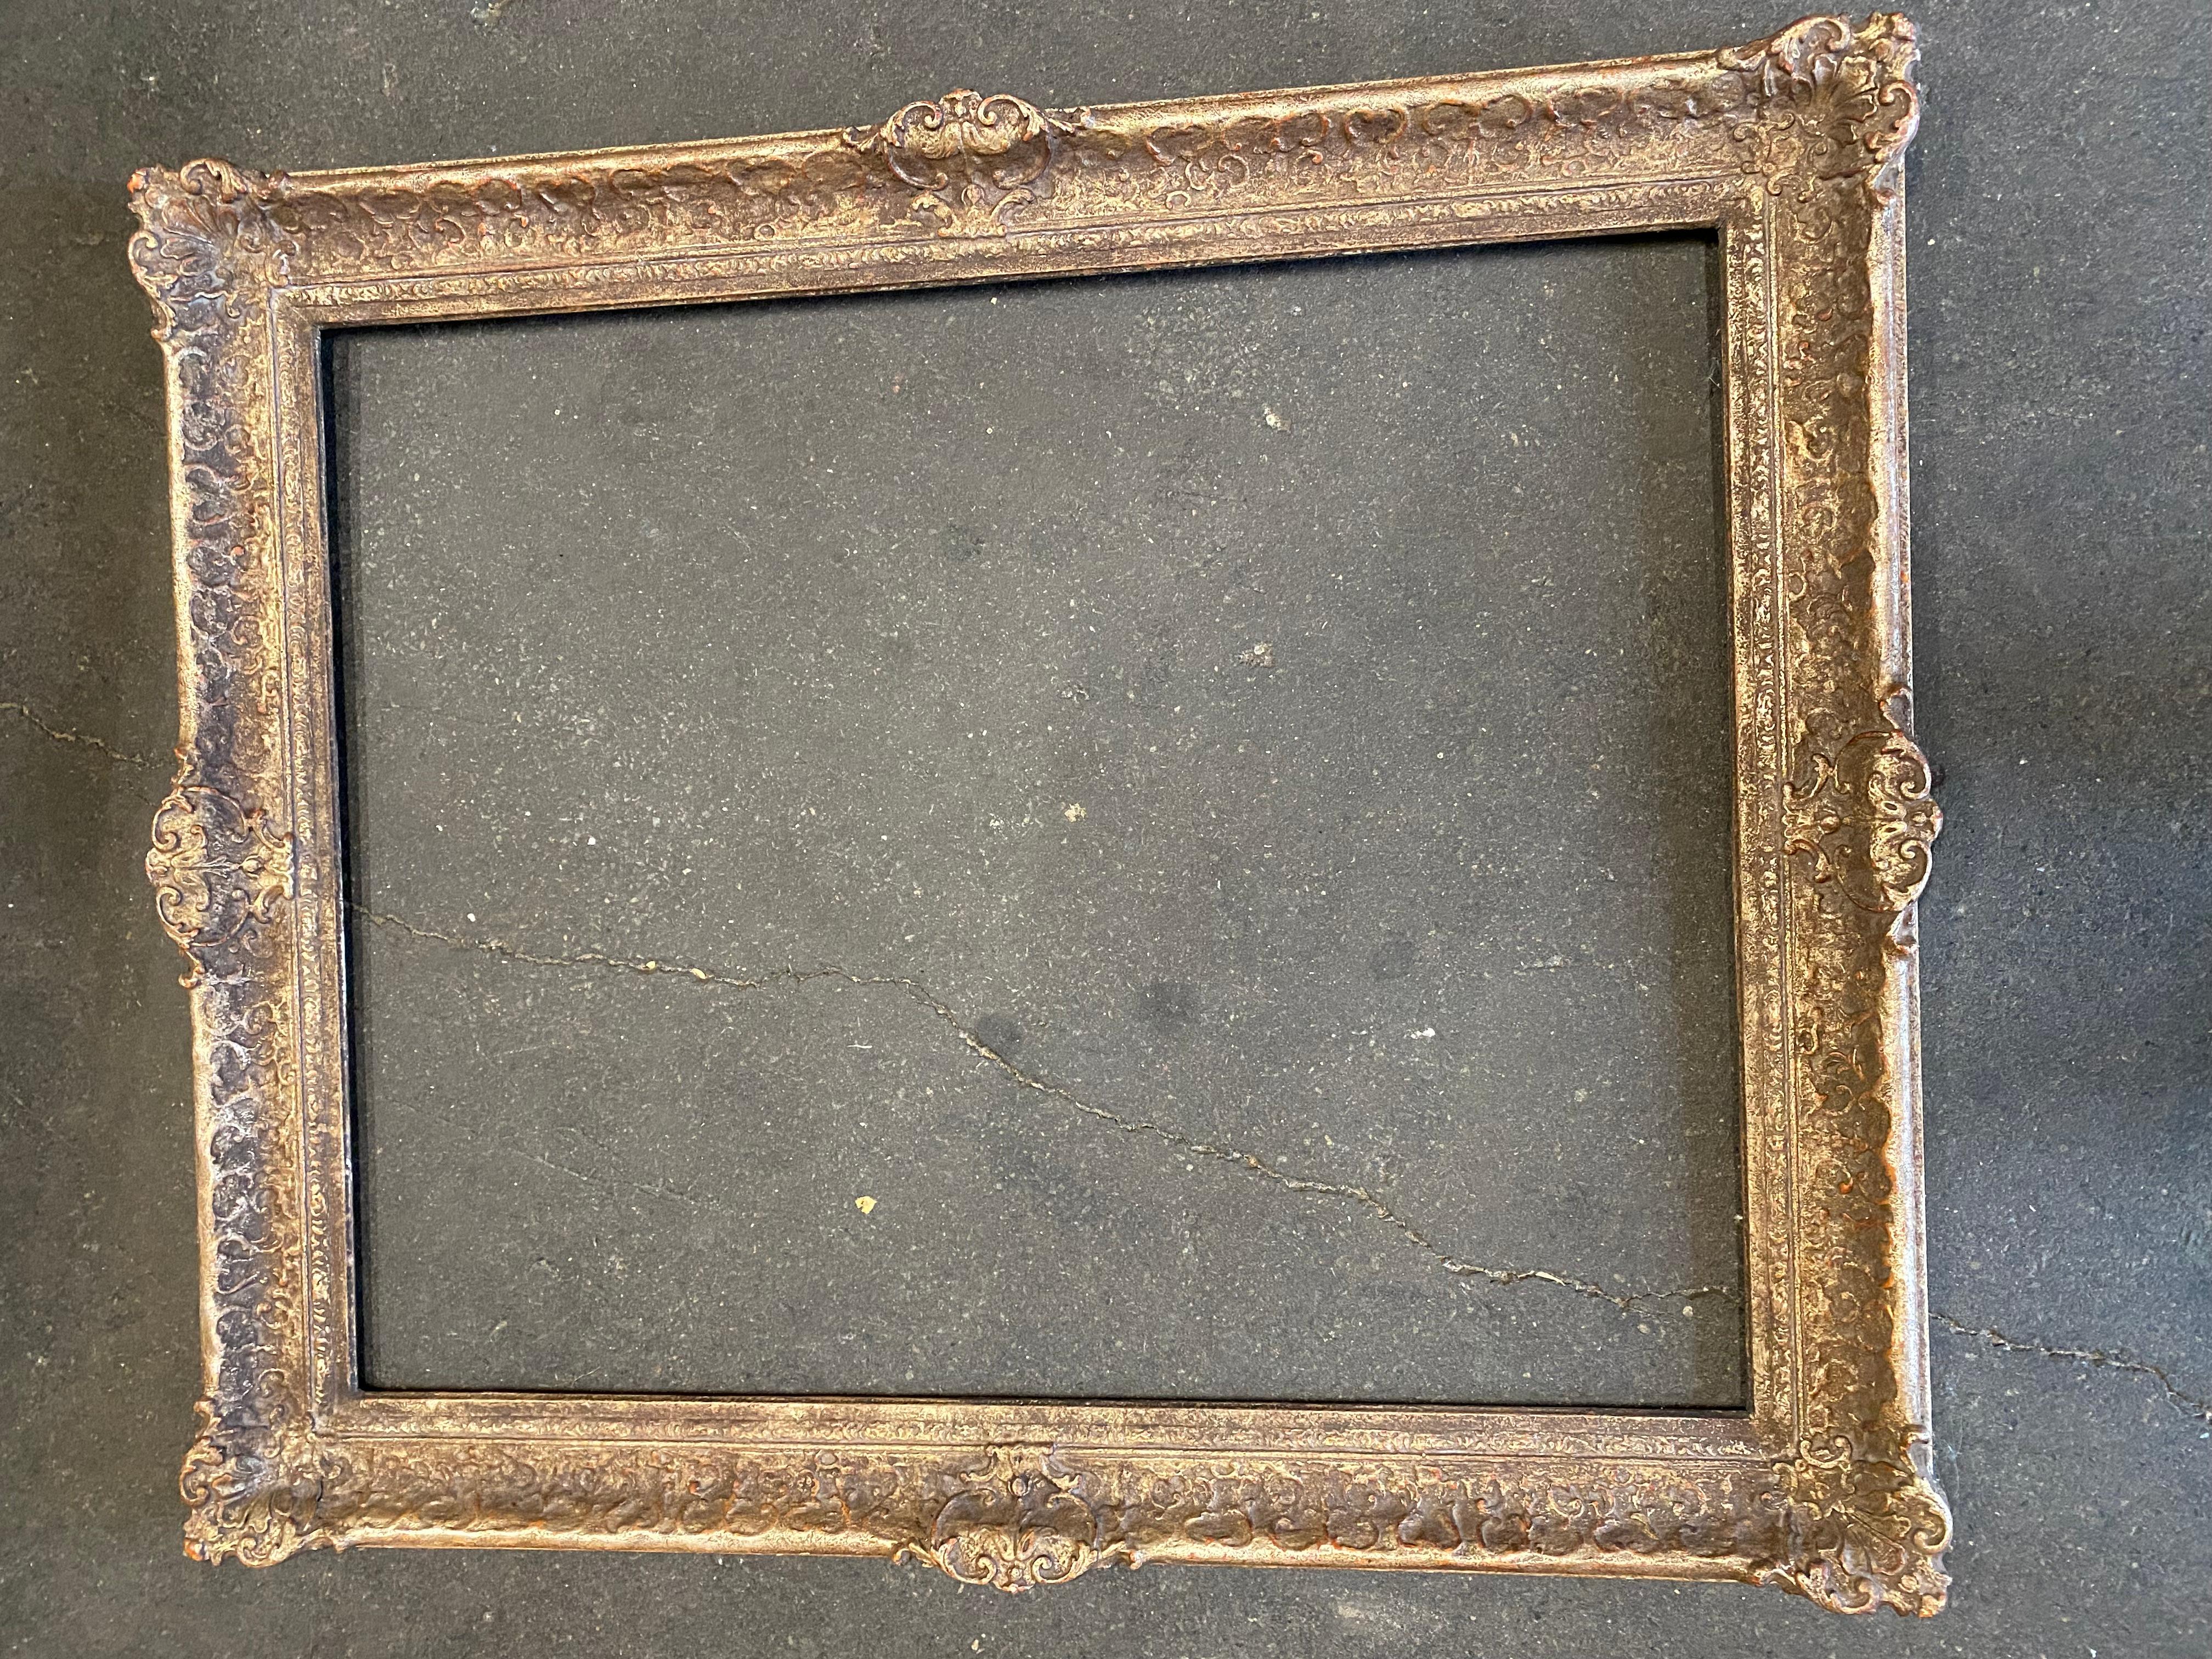 This large and highly decorative Impressionist frame is made of wood and dates from around 1880 in France. A piece that can be used in a classic way to frame an oil painting or a modern graphic. But the frame can also be used in other ways. Either